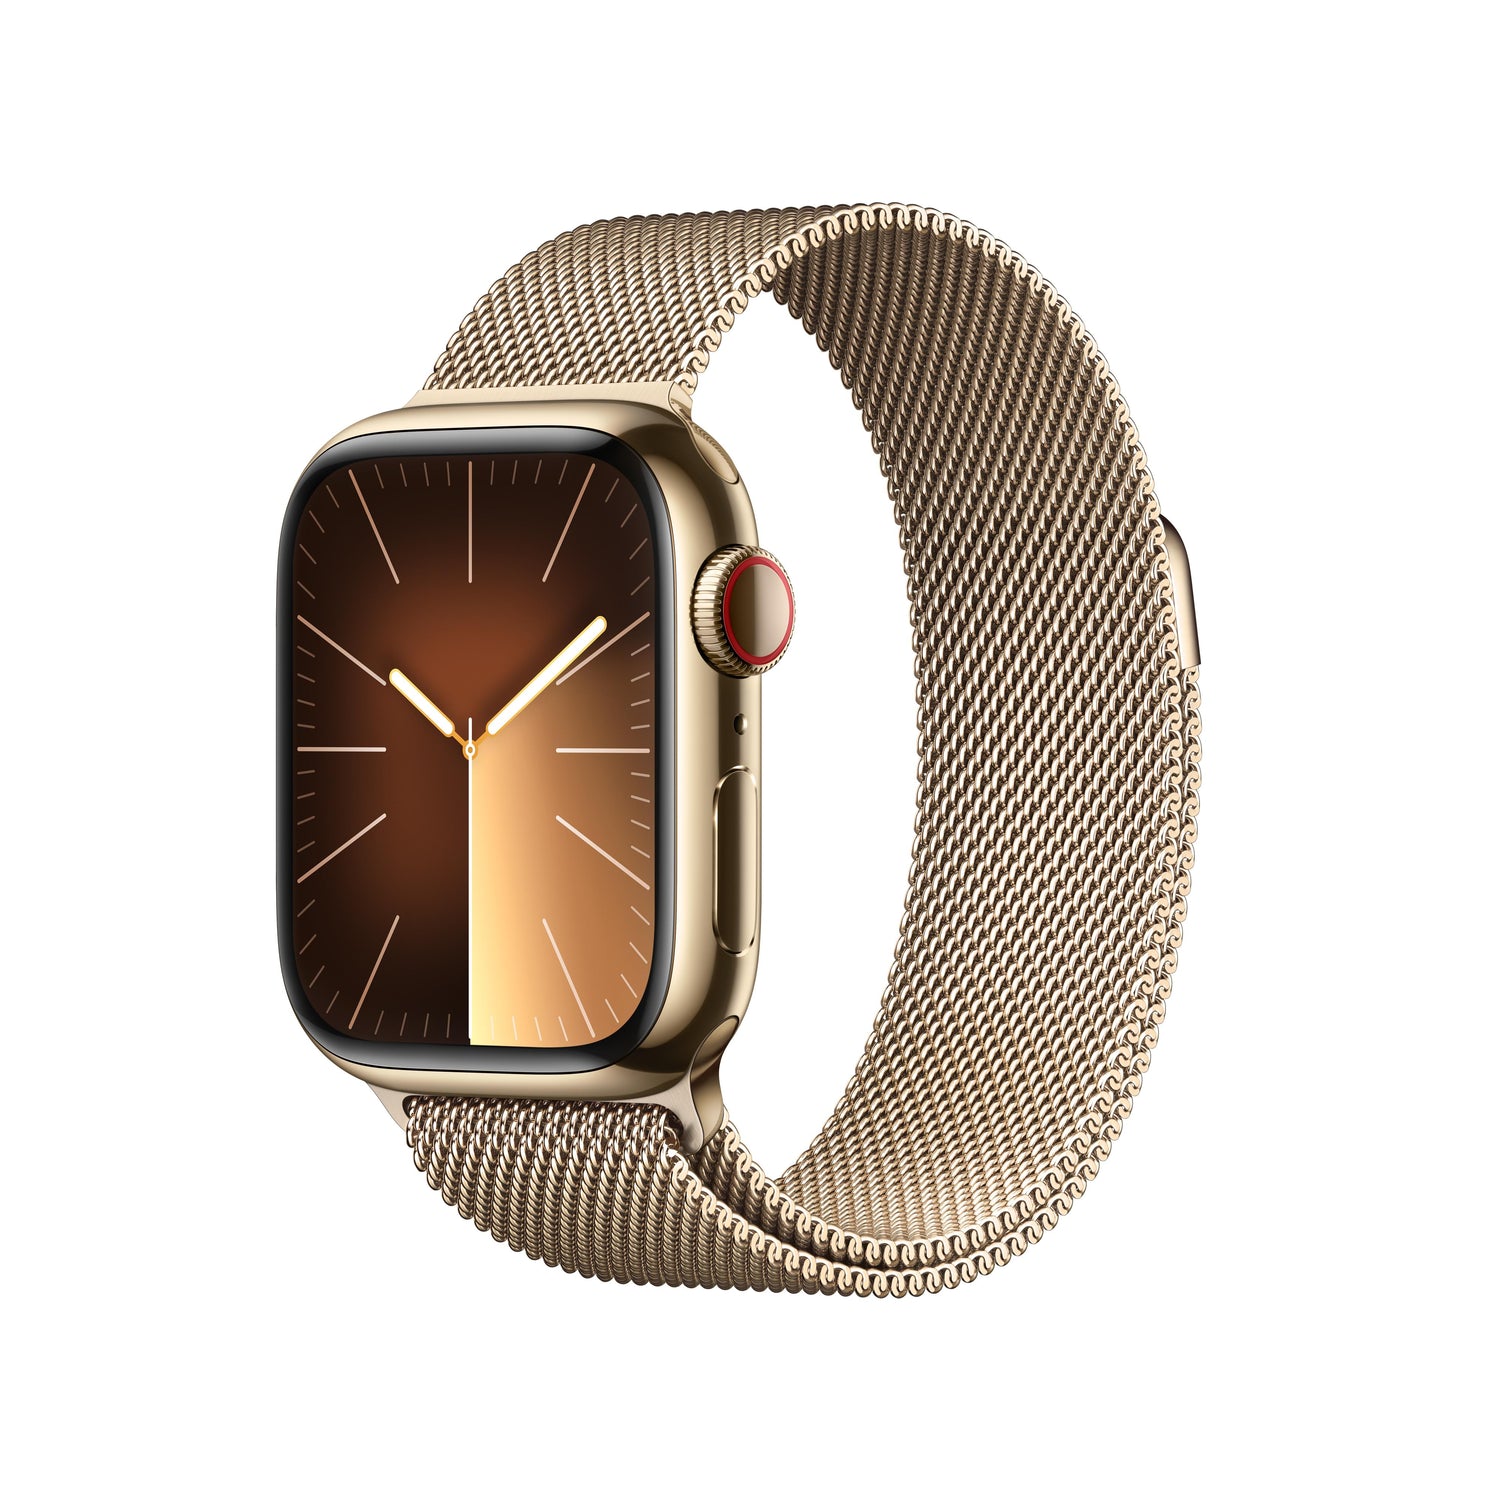 Apple Watch SeriesÊ9 GPS + Cellular 41mm Gold Stainless Steel Case with Gold Milanese Loop